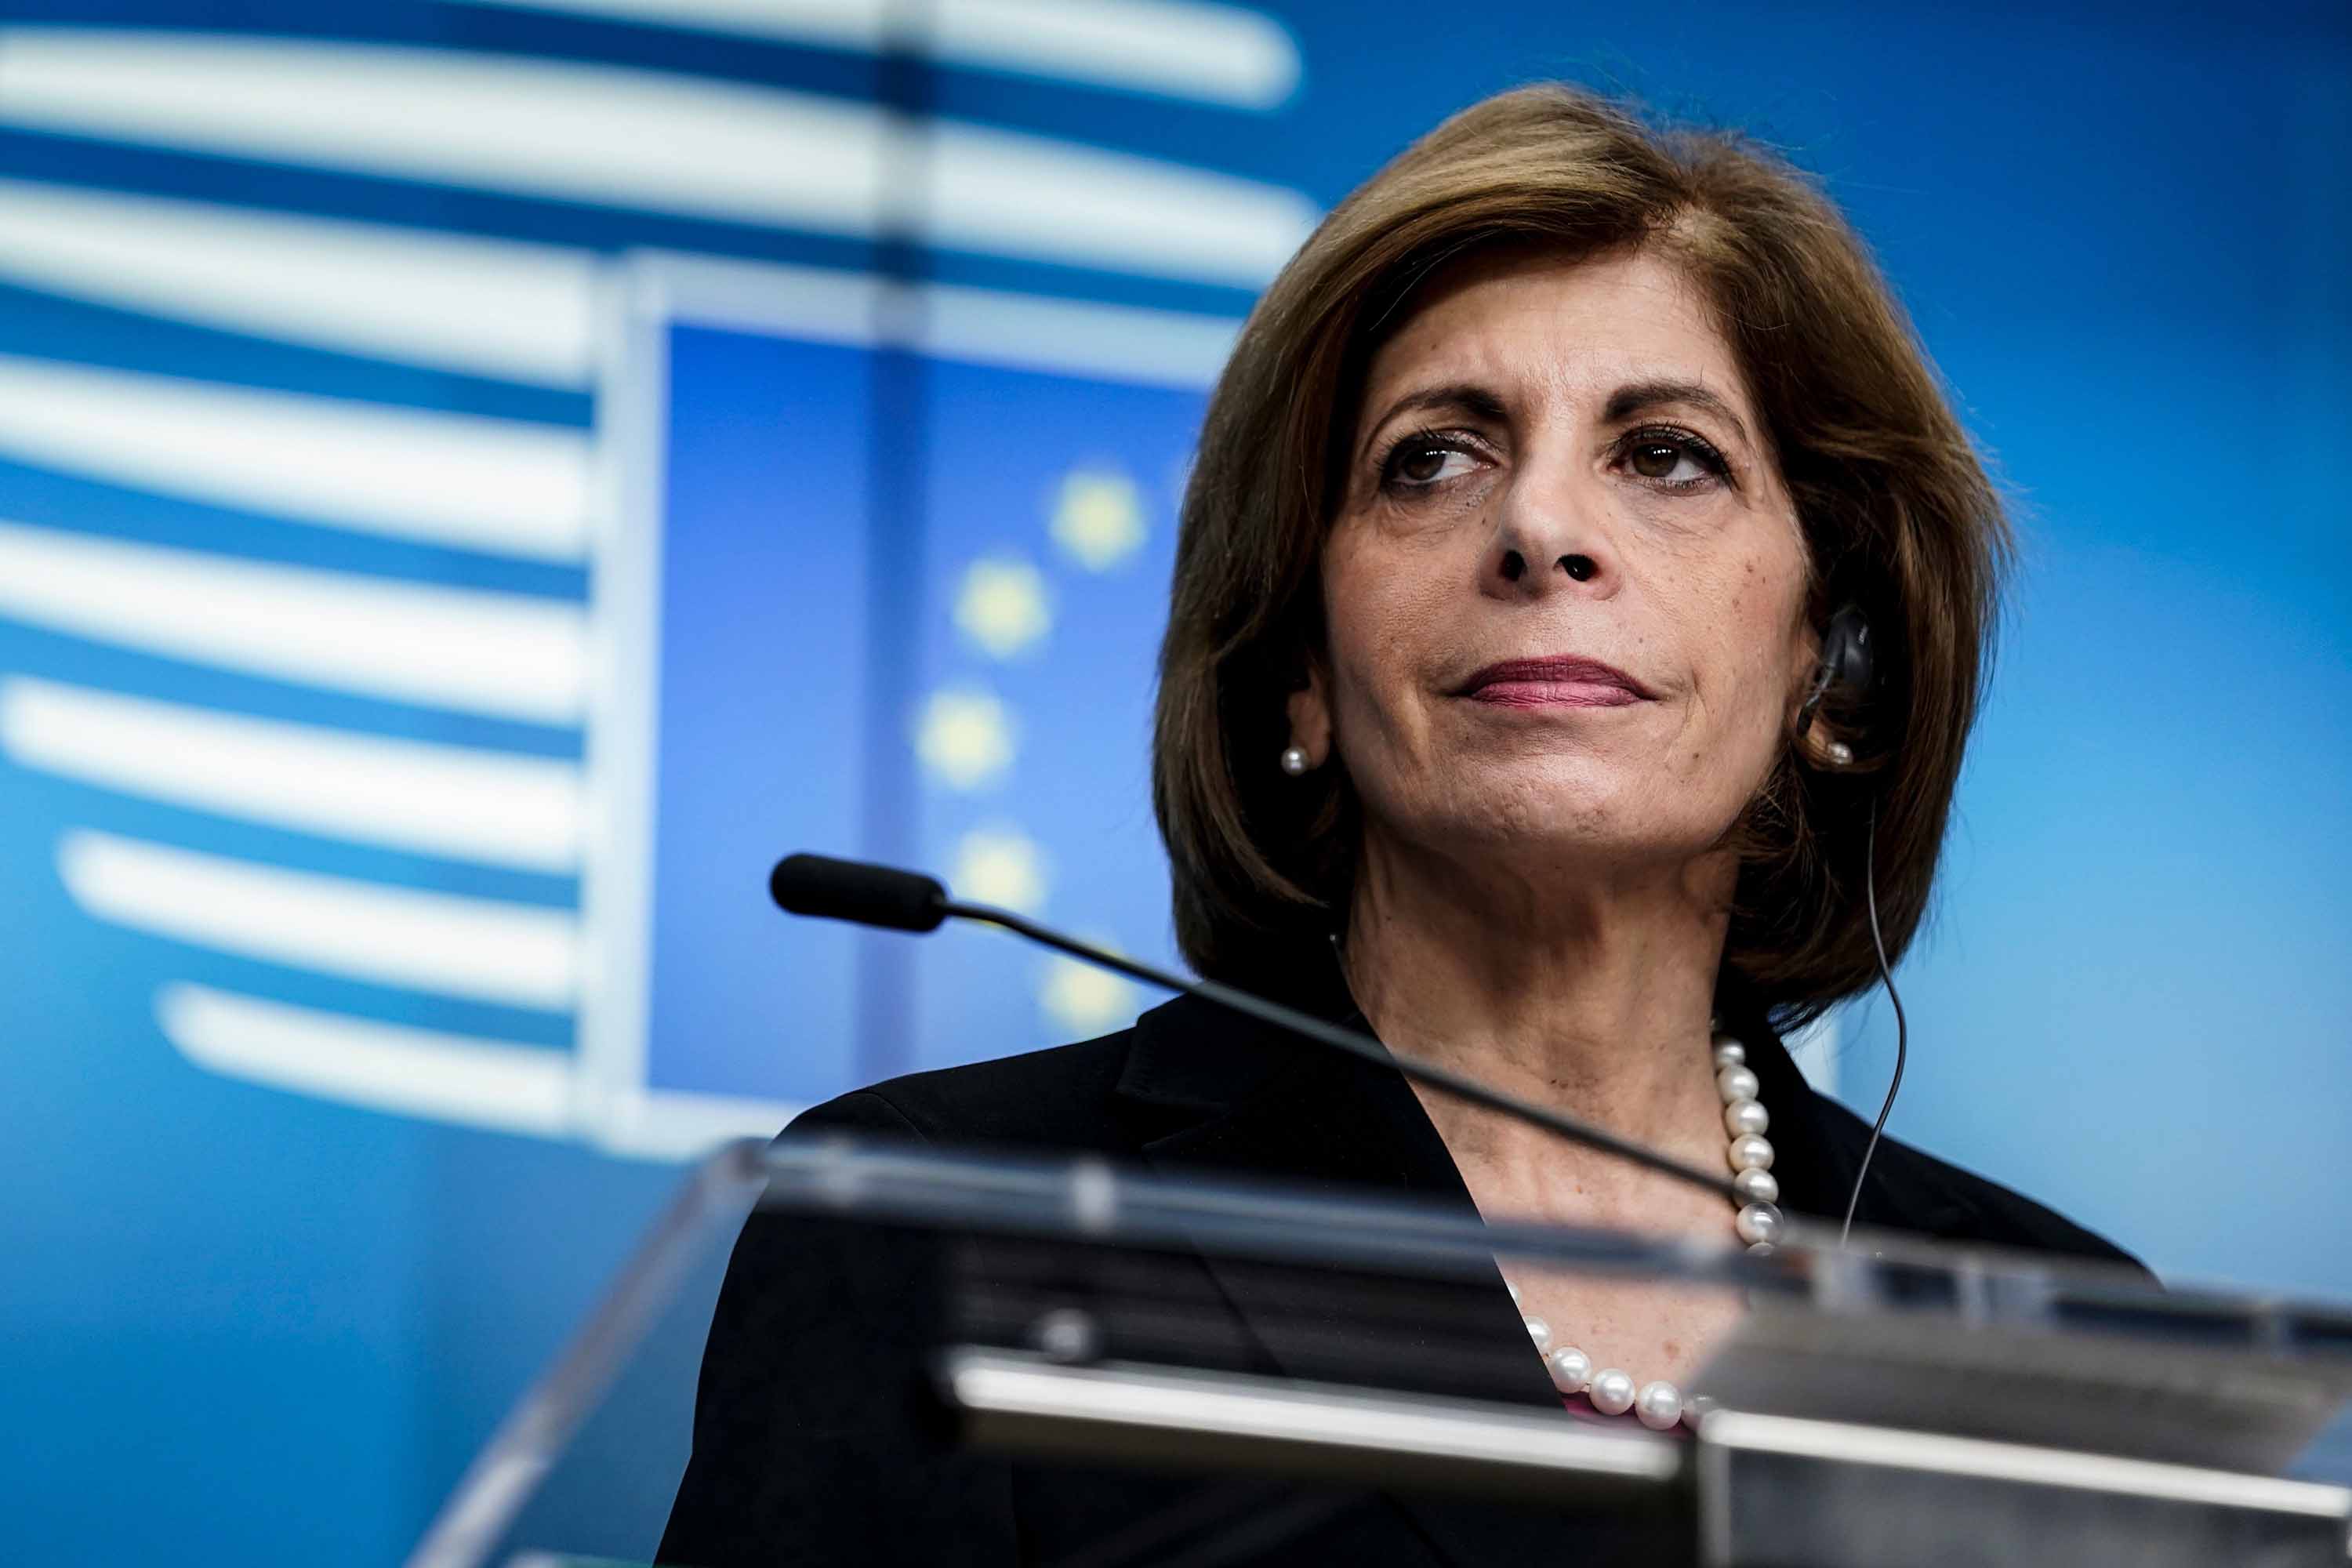 EU Commissioner for Health, Stella Kyriakides gives a press conference in Brussels, Belgium on March 6.